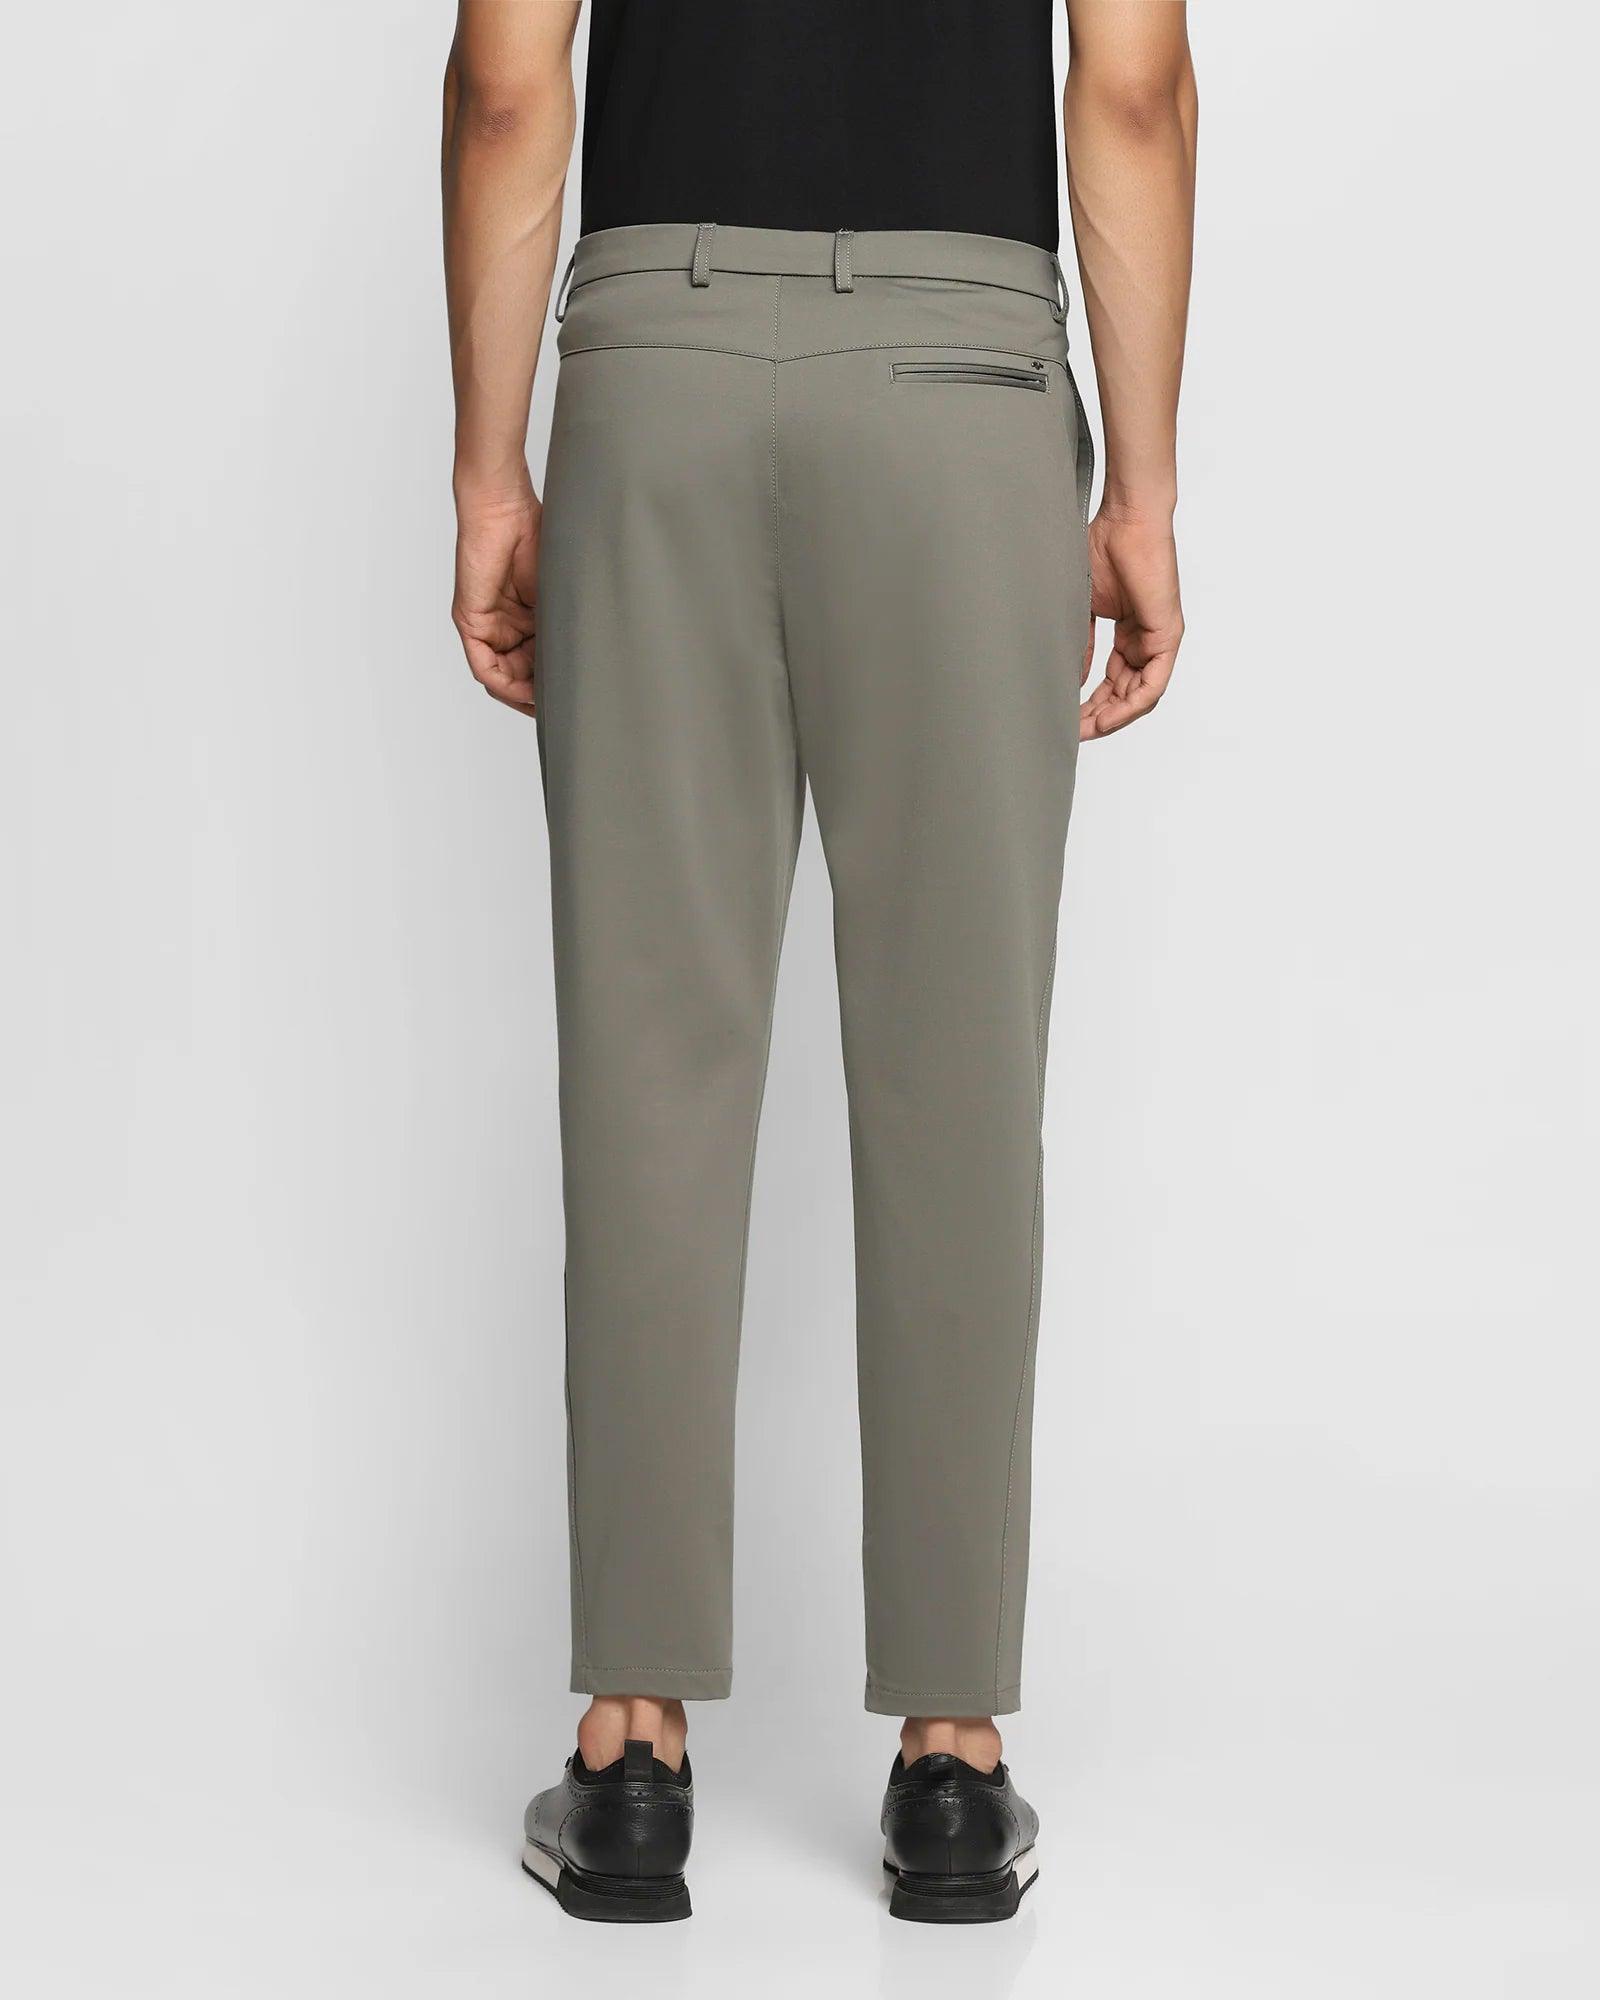 TechPro Nadal Casual Olive Textured Khakis - Hector